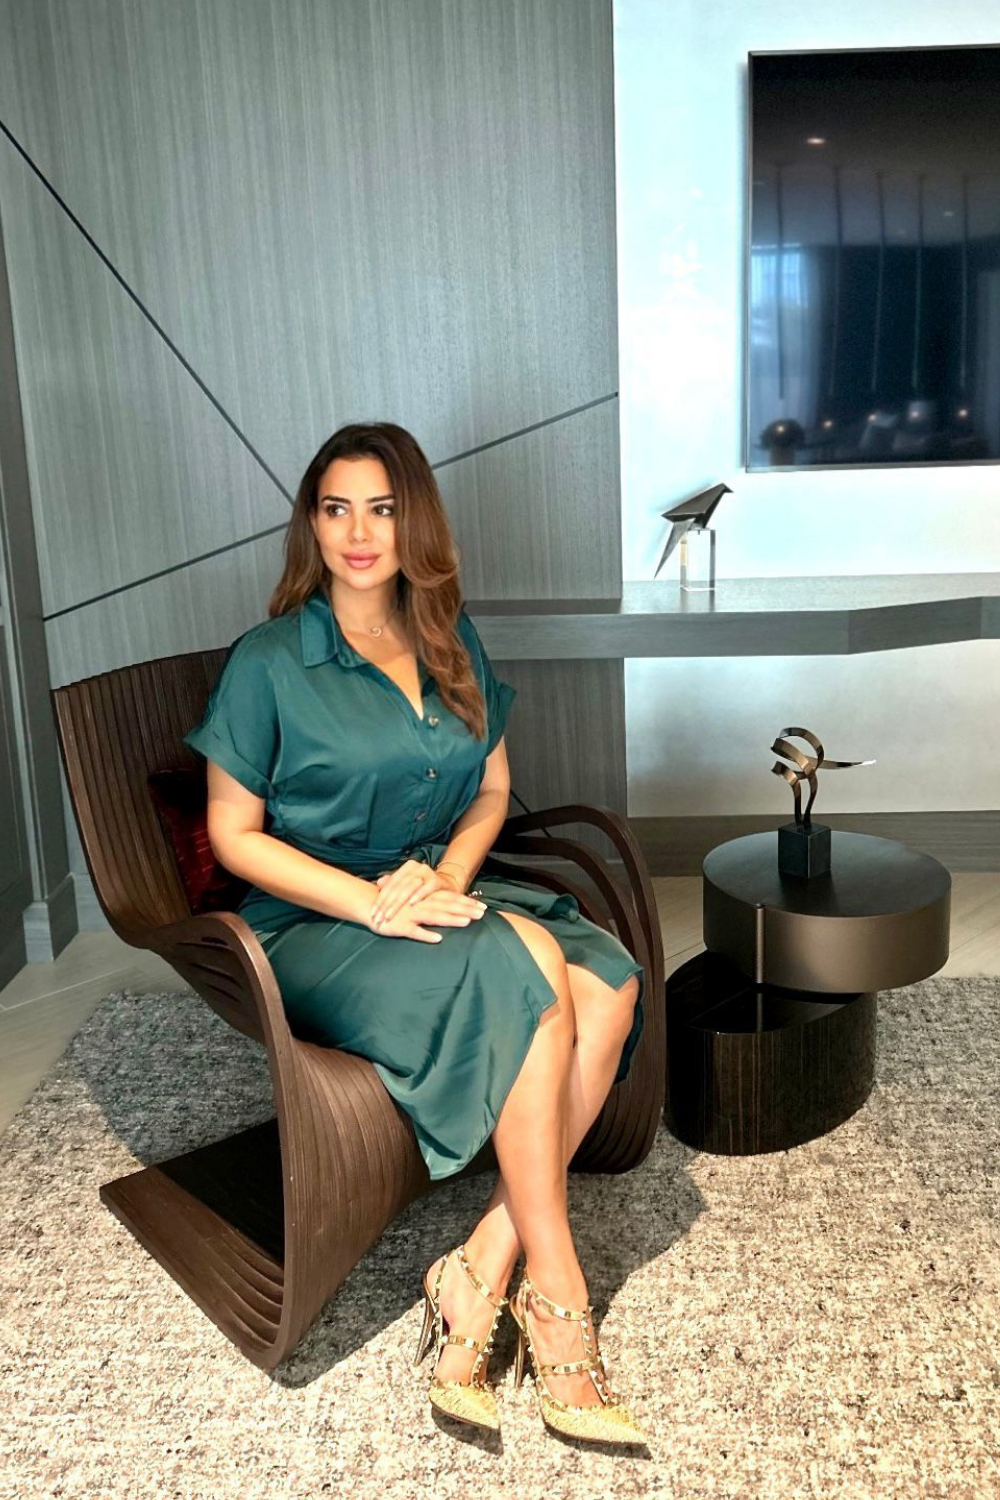 Dr. Sarah Hadid, gracefully seated in a contemporary office setting with modern decor